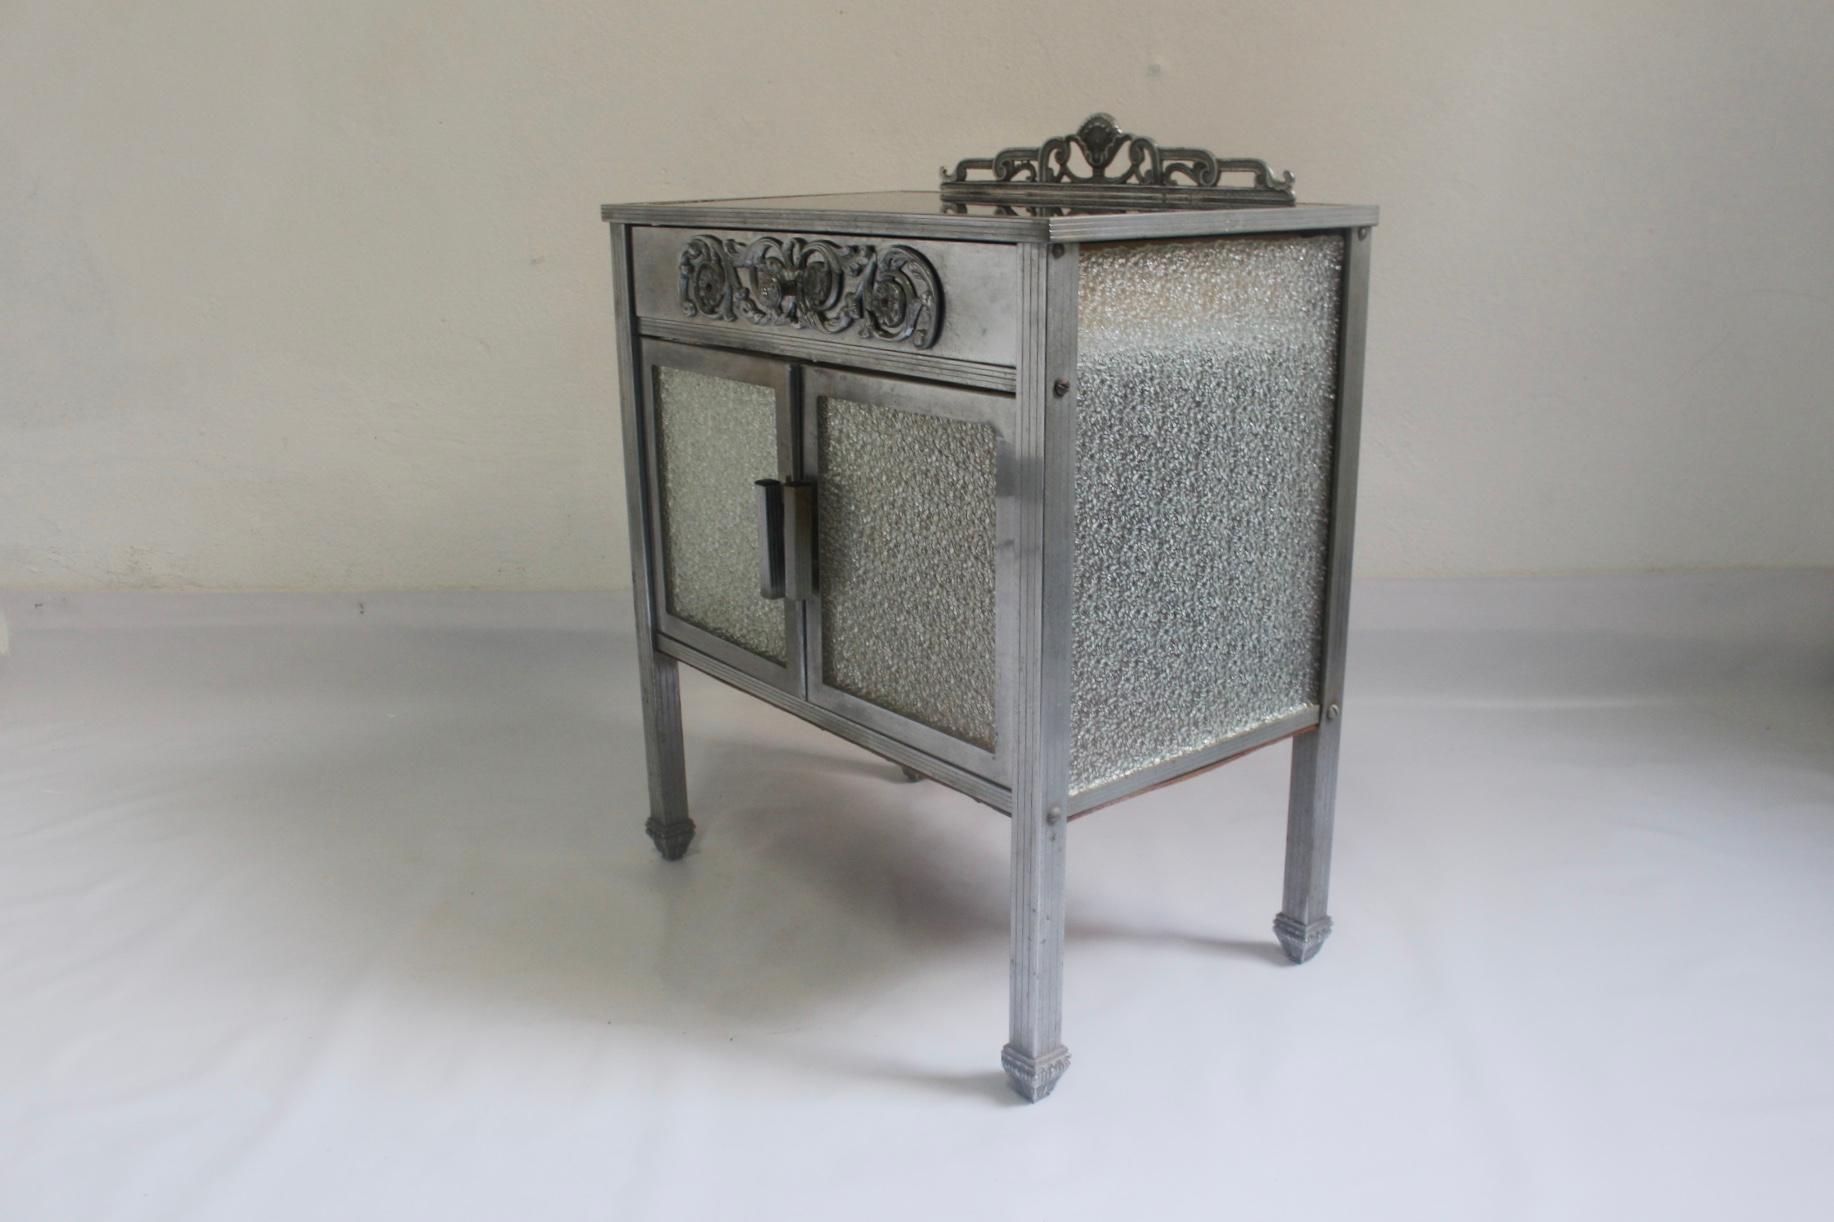 Art Deco cupboard from the 1930s, made from solid plated-nickel structure with smoke glass top and wooden shelf with four original glass panels. Drawer is made of wood and embellished with carved metalwork.
Condition: Good vintage condition, with